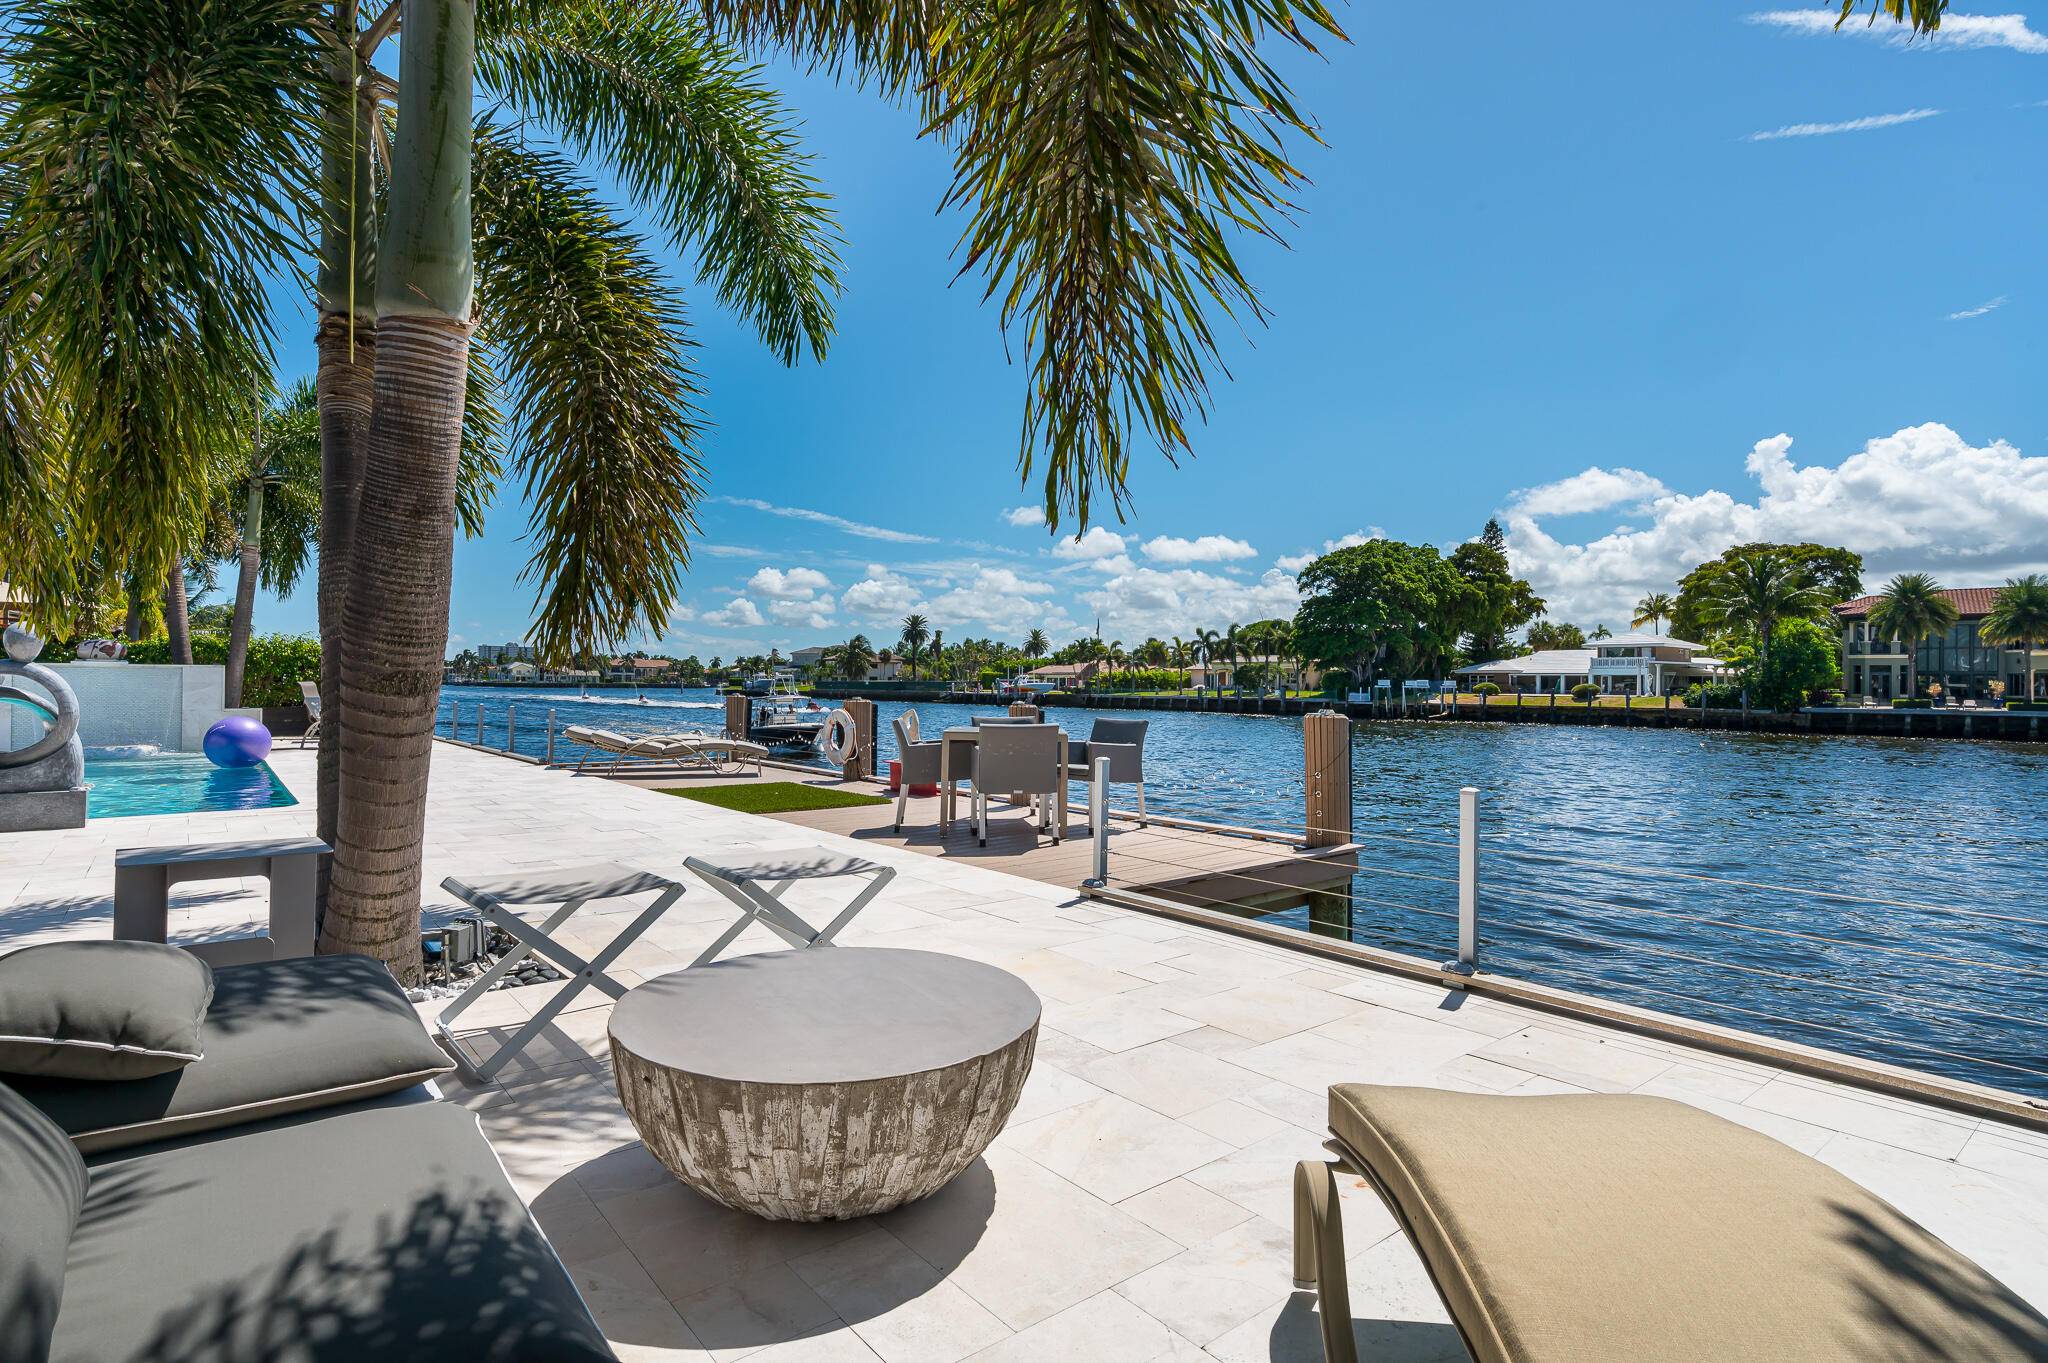 Artistically renovated with clean modern lines, this gated Direct Intracoastal masterpiece on 1 3 of an acre sparkles and delights.